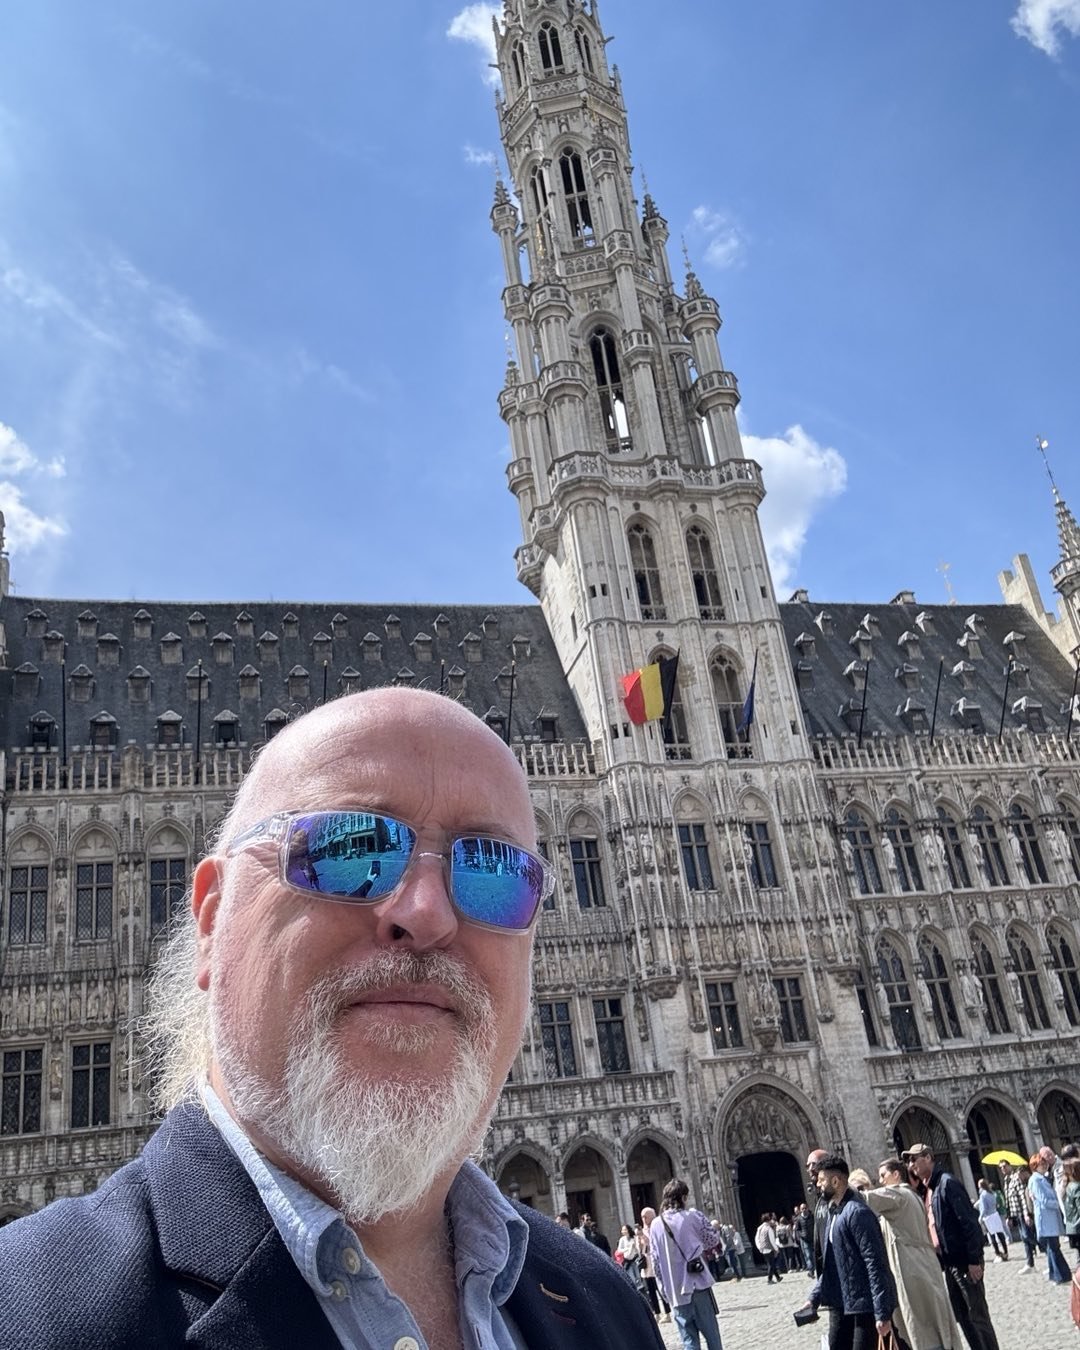 Out and about in Brussels today - thanks to all those who came to the gig last night . I celebrated with martinis - merci and bedankt !